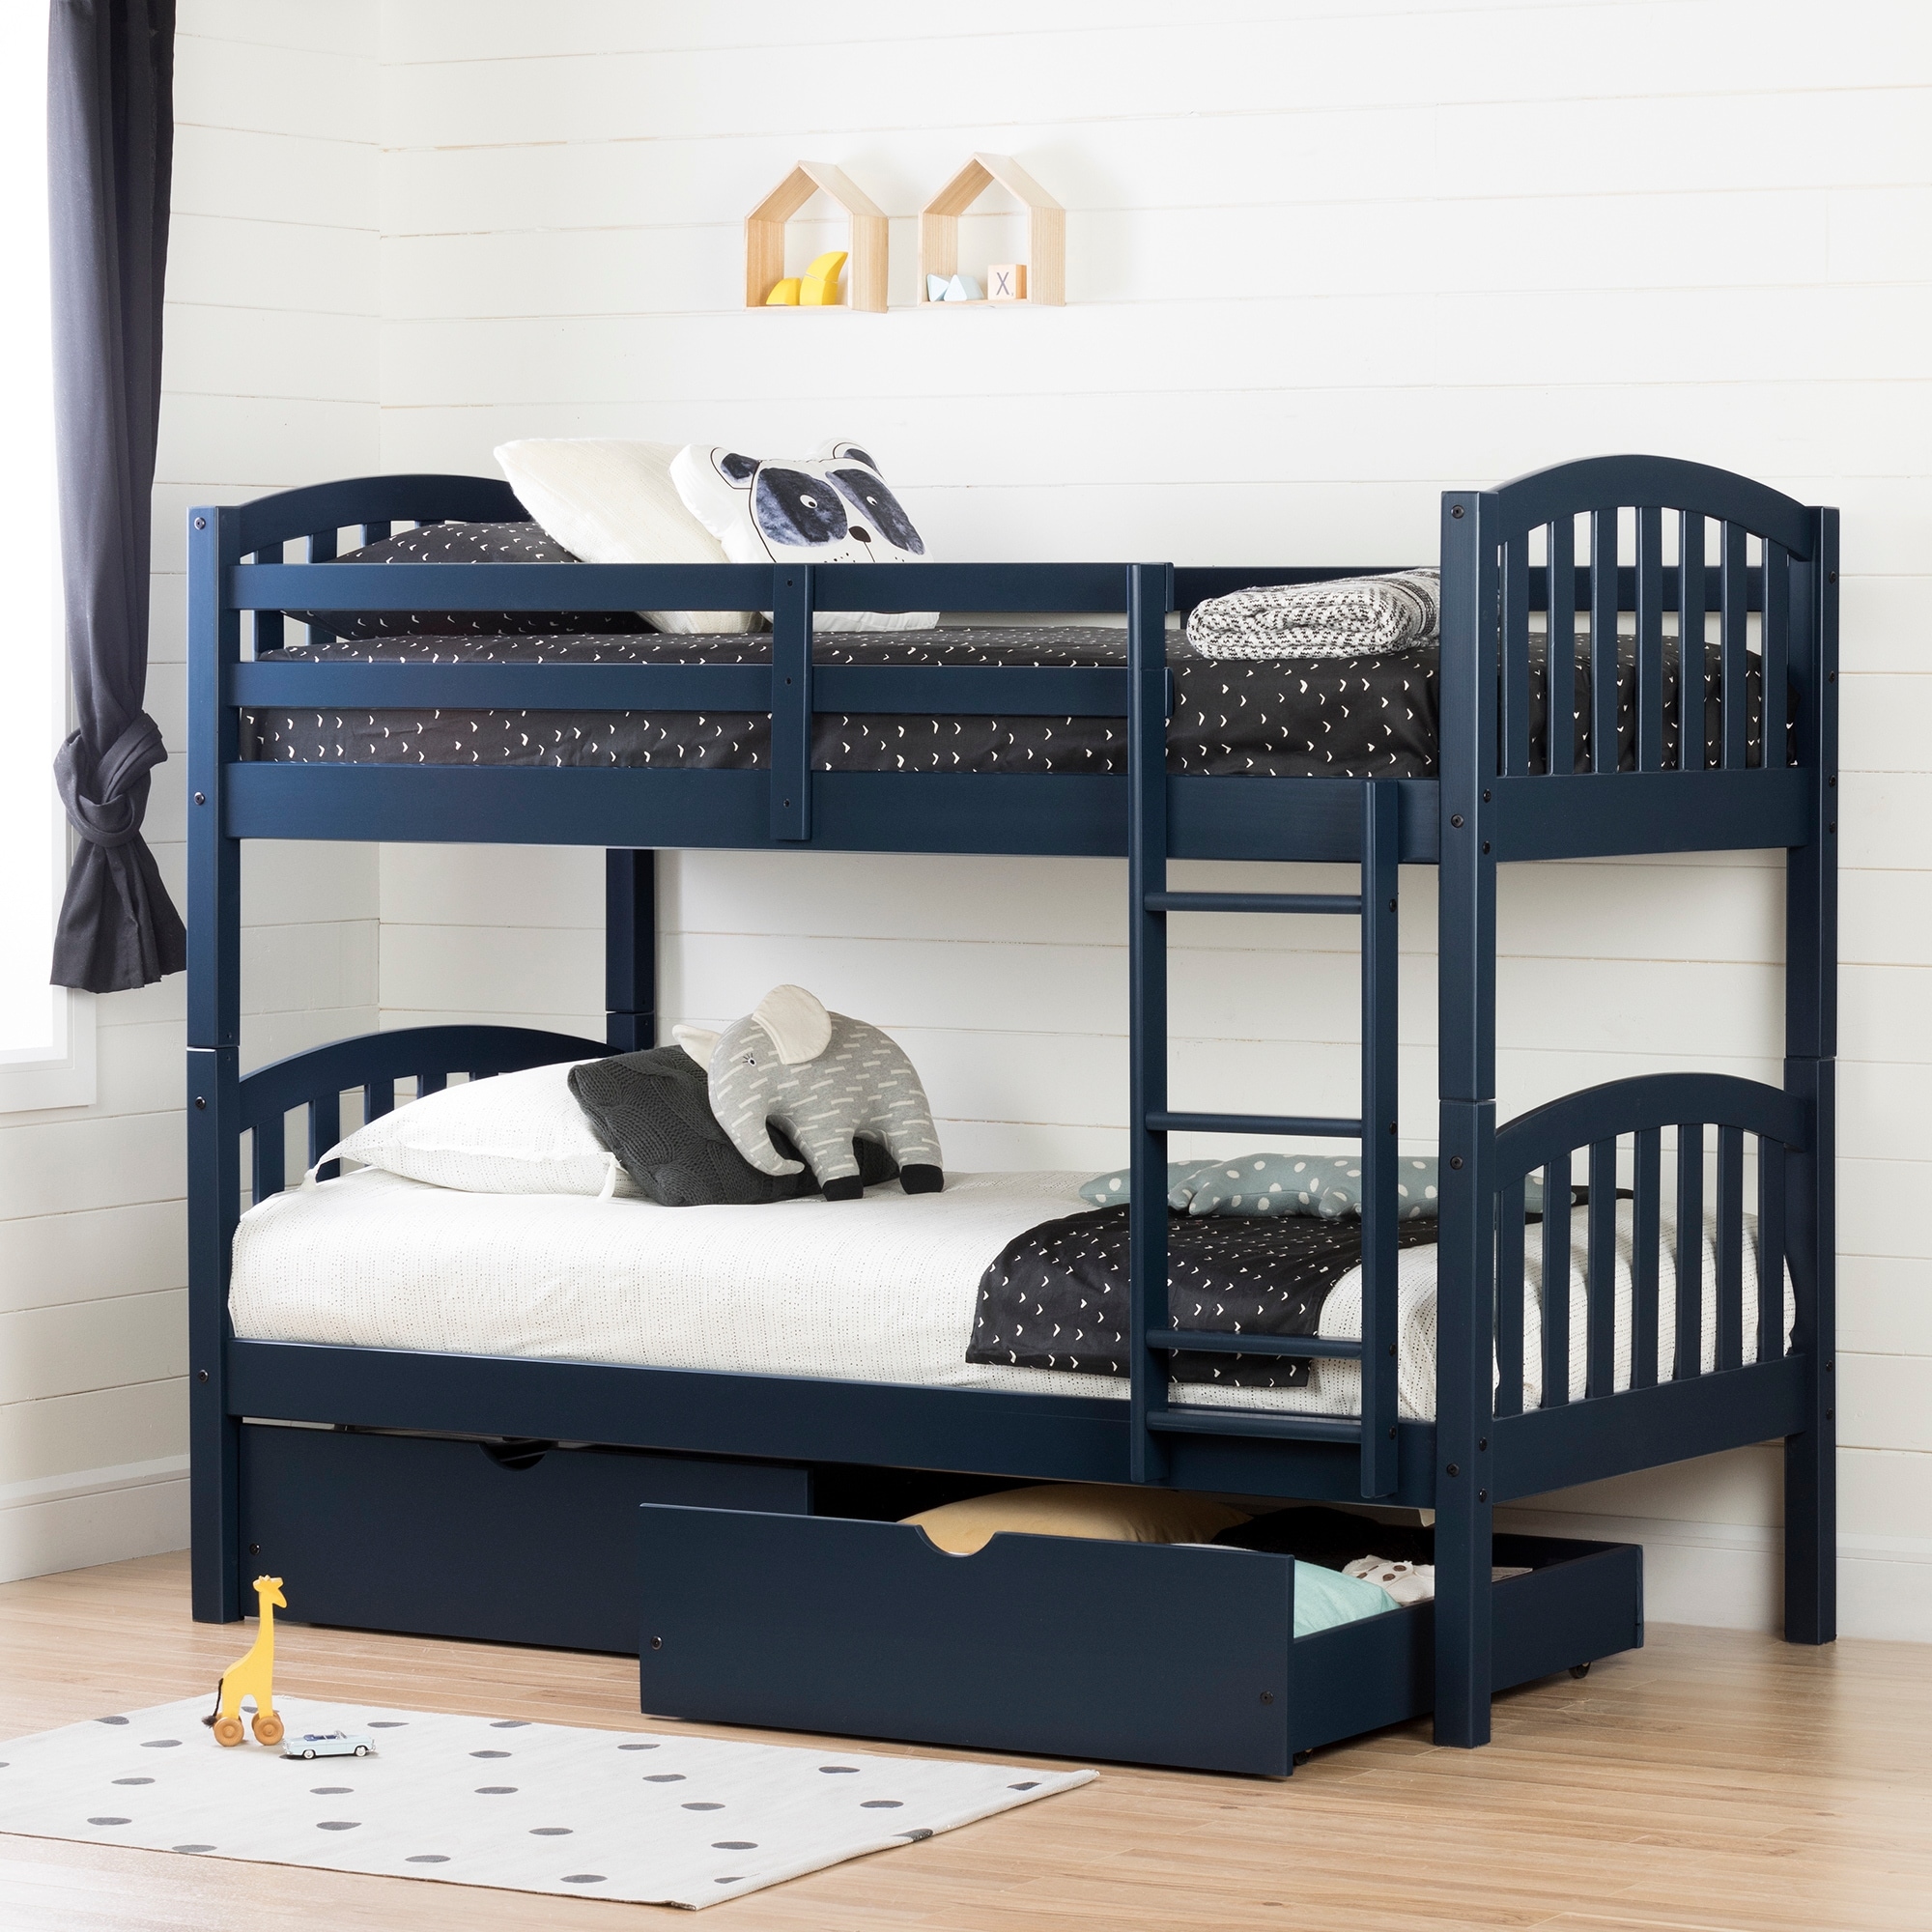 South Shore Asten Bunk Beds and Rolling Drawers Set